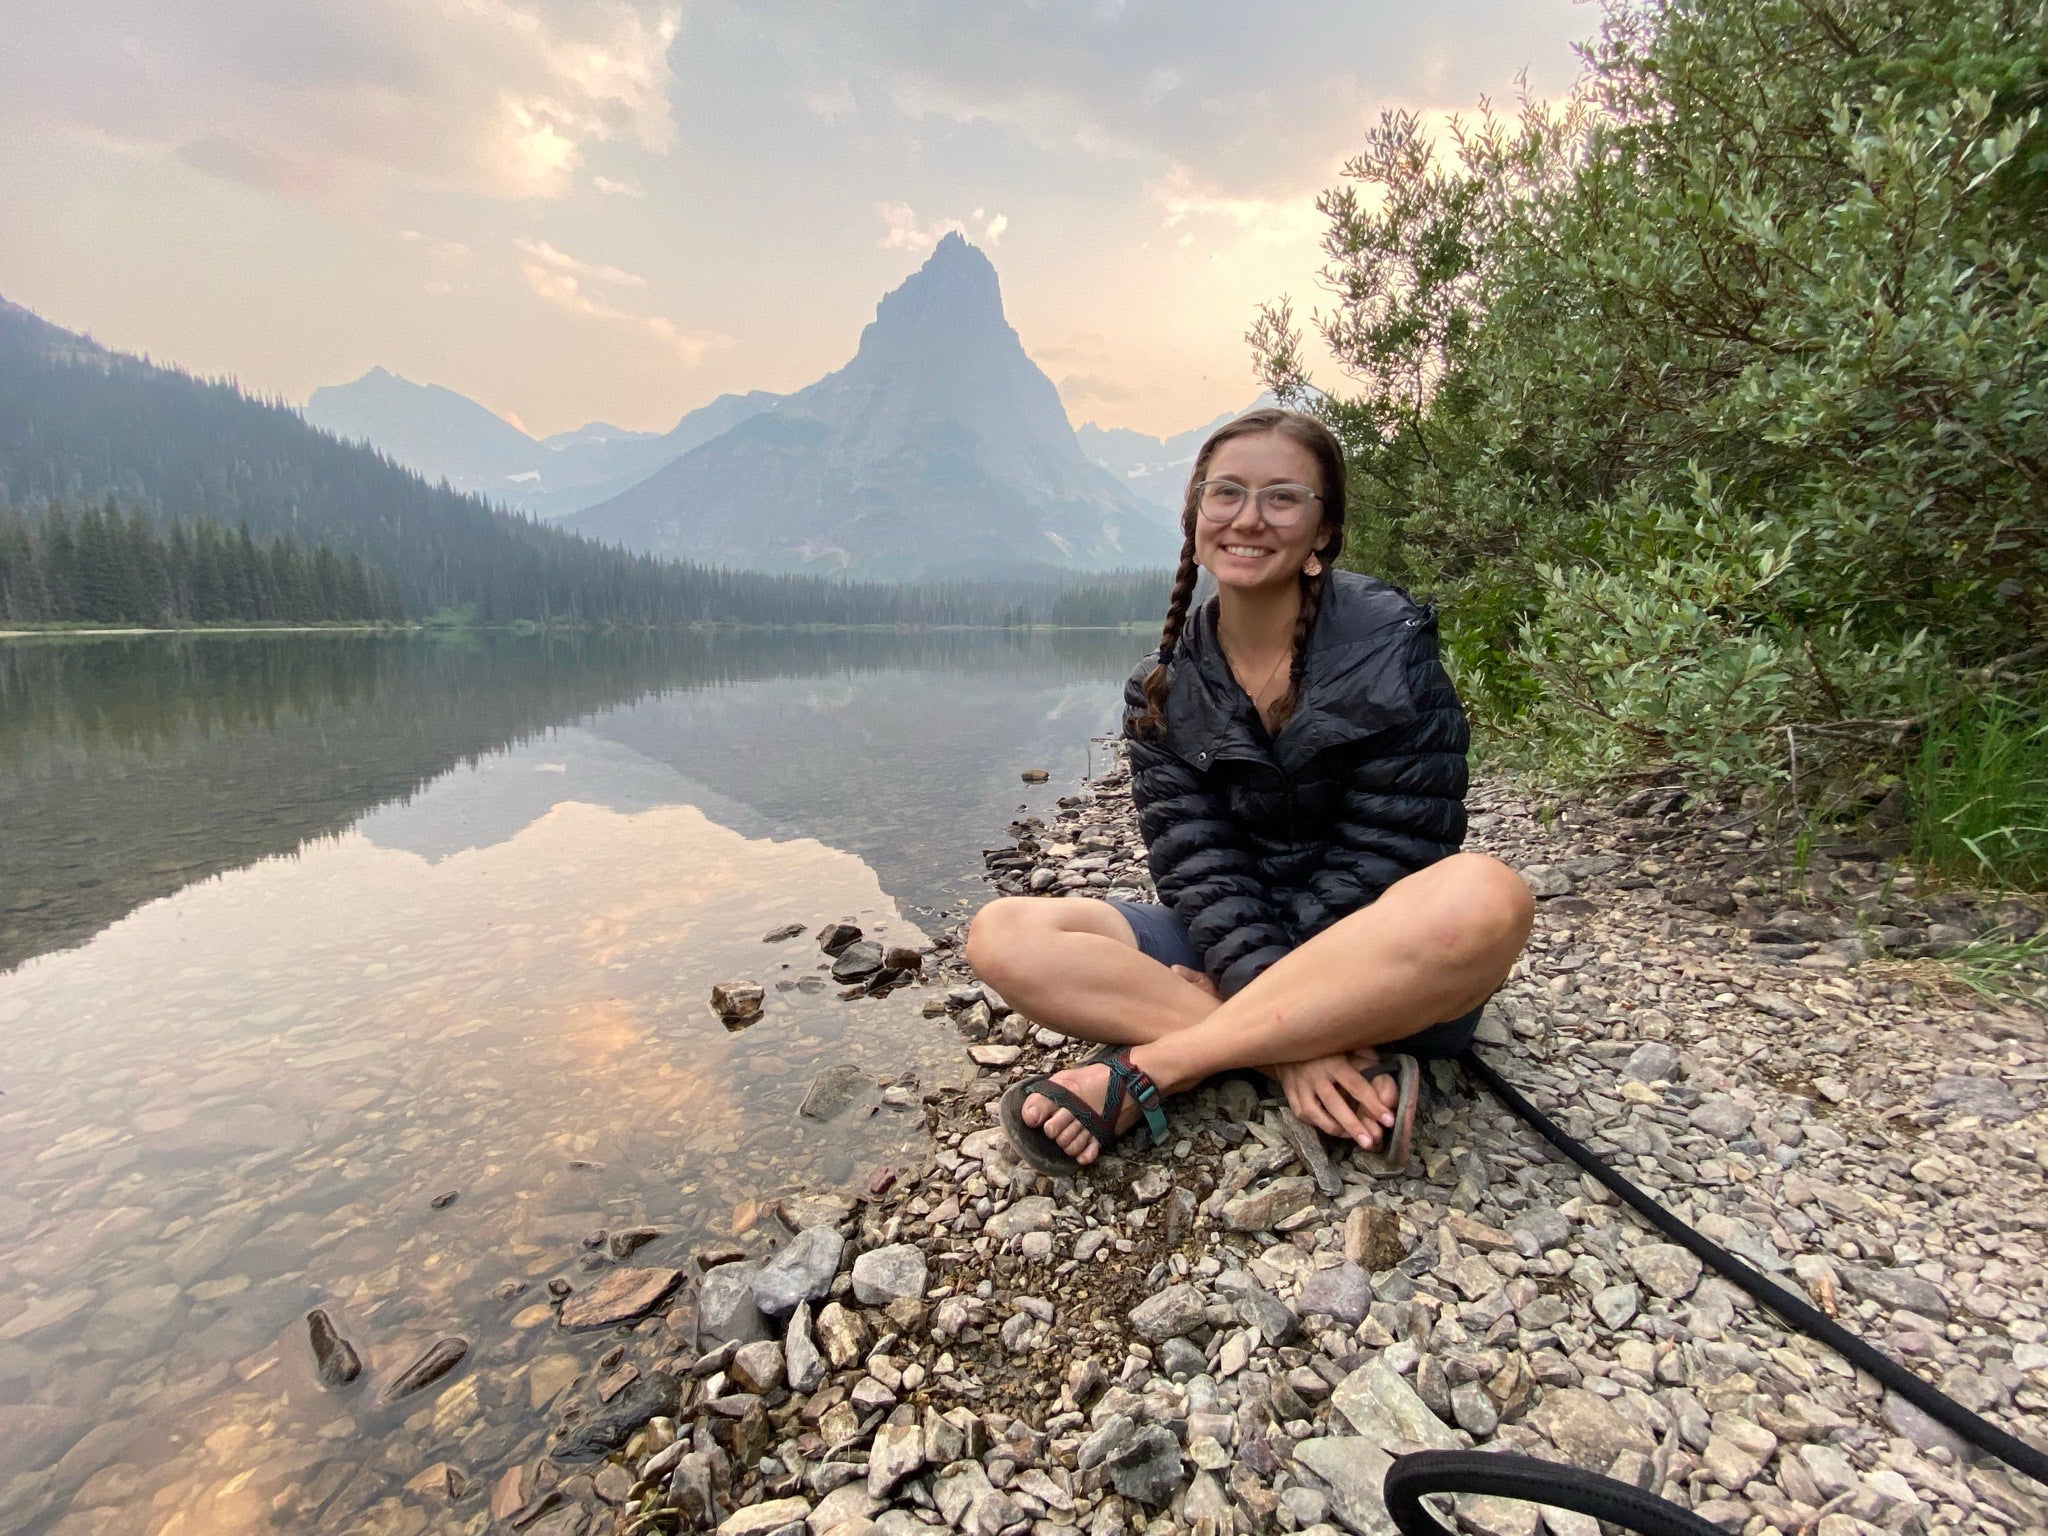 Image of Teacher Prep student Phaeren Roby sitting in front of a lake with a mountain in the background